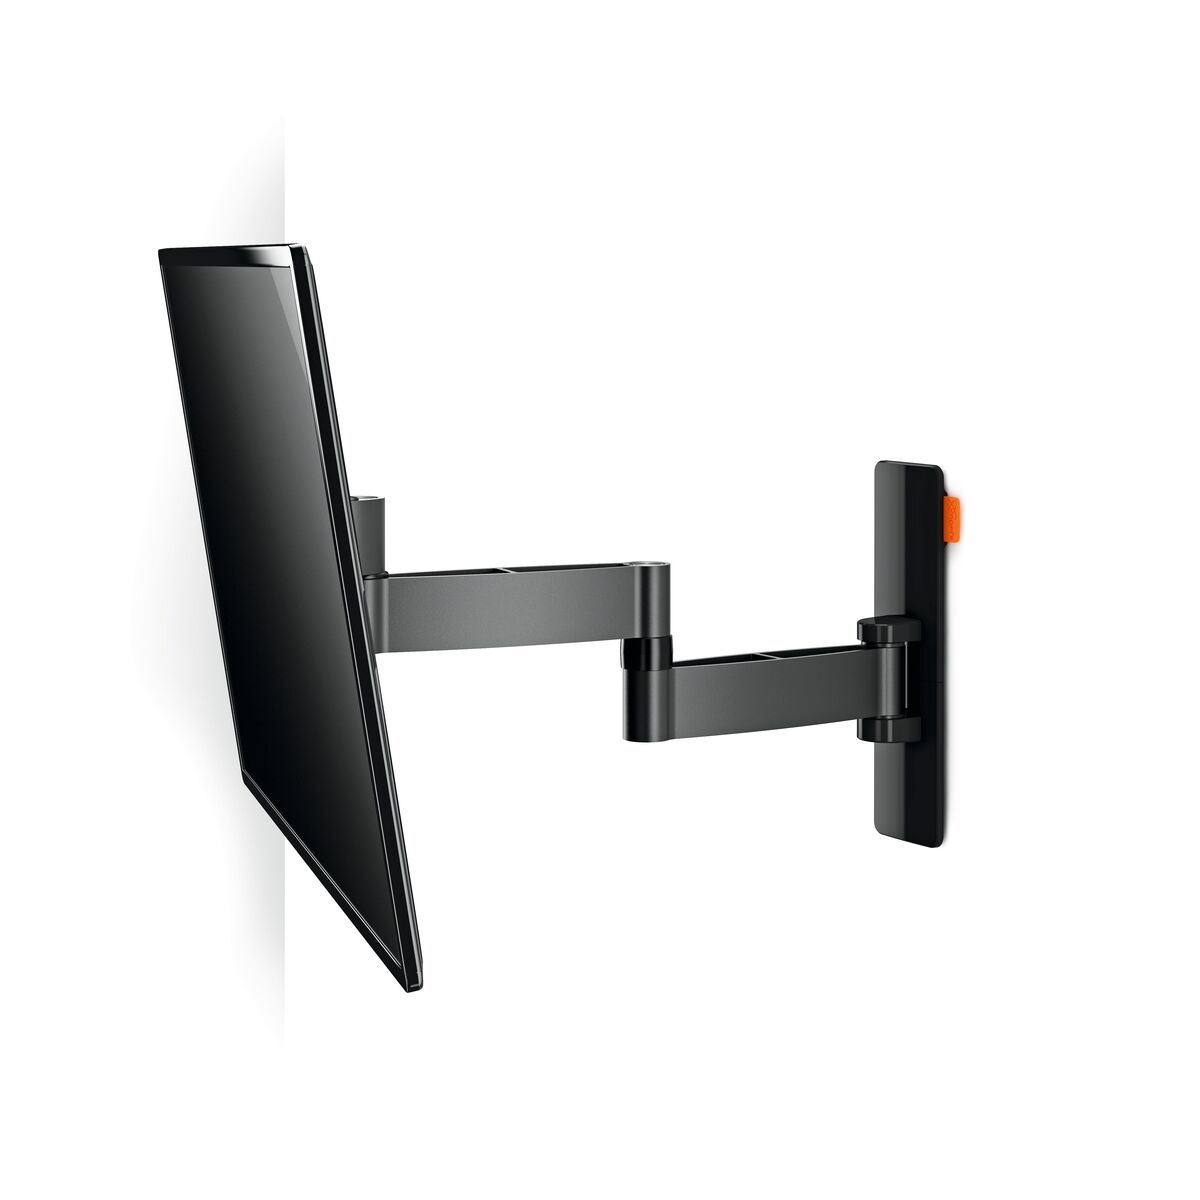 Vogel's WALL 3145 Full-Motion TV Wall Mount (black) - Suitable for 19 up to 43 inch TVs - Full motion (up to 180°) - Tilt -10°/+10° - White wall